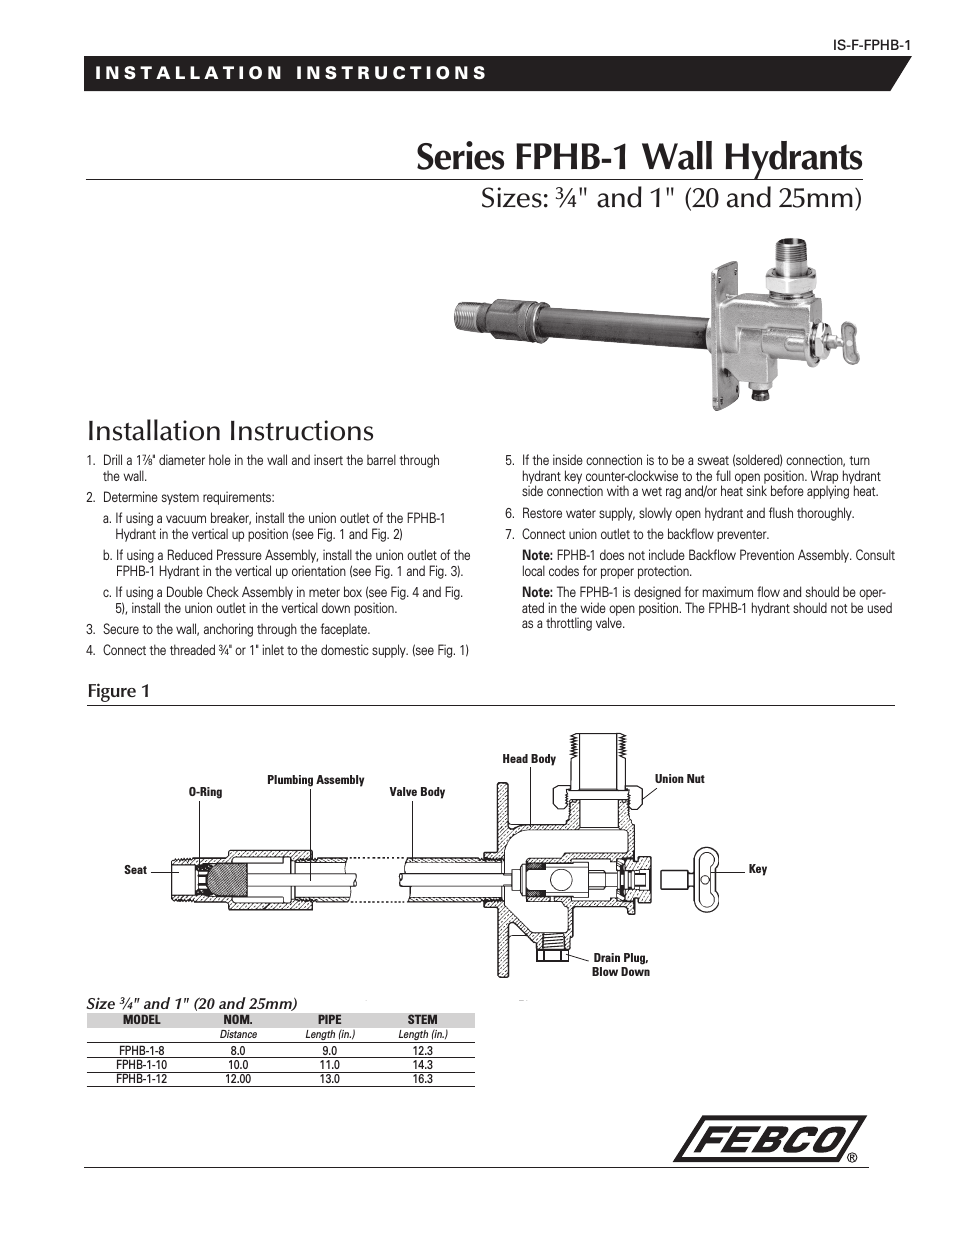 FPHB-1 Key Operated Wall Hydrants for Irrigation System Winterization